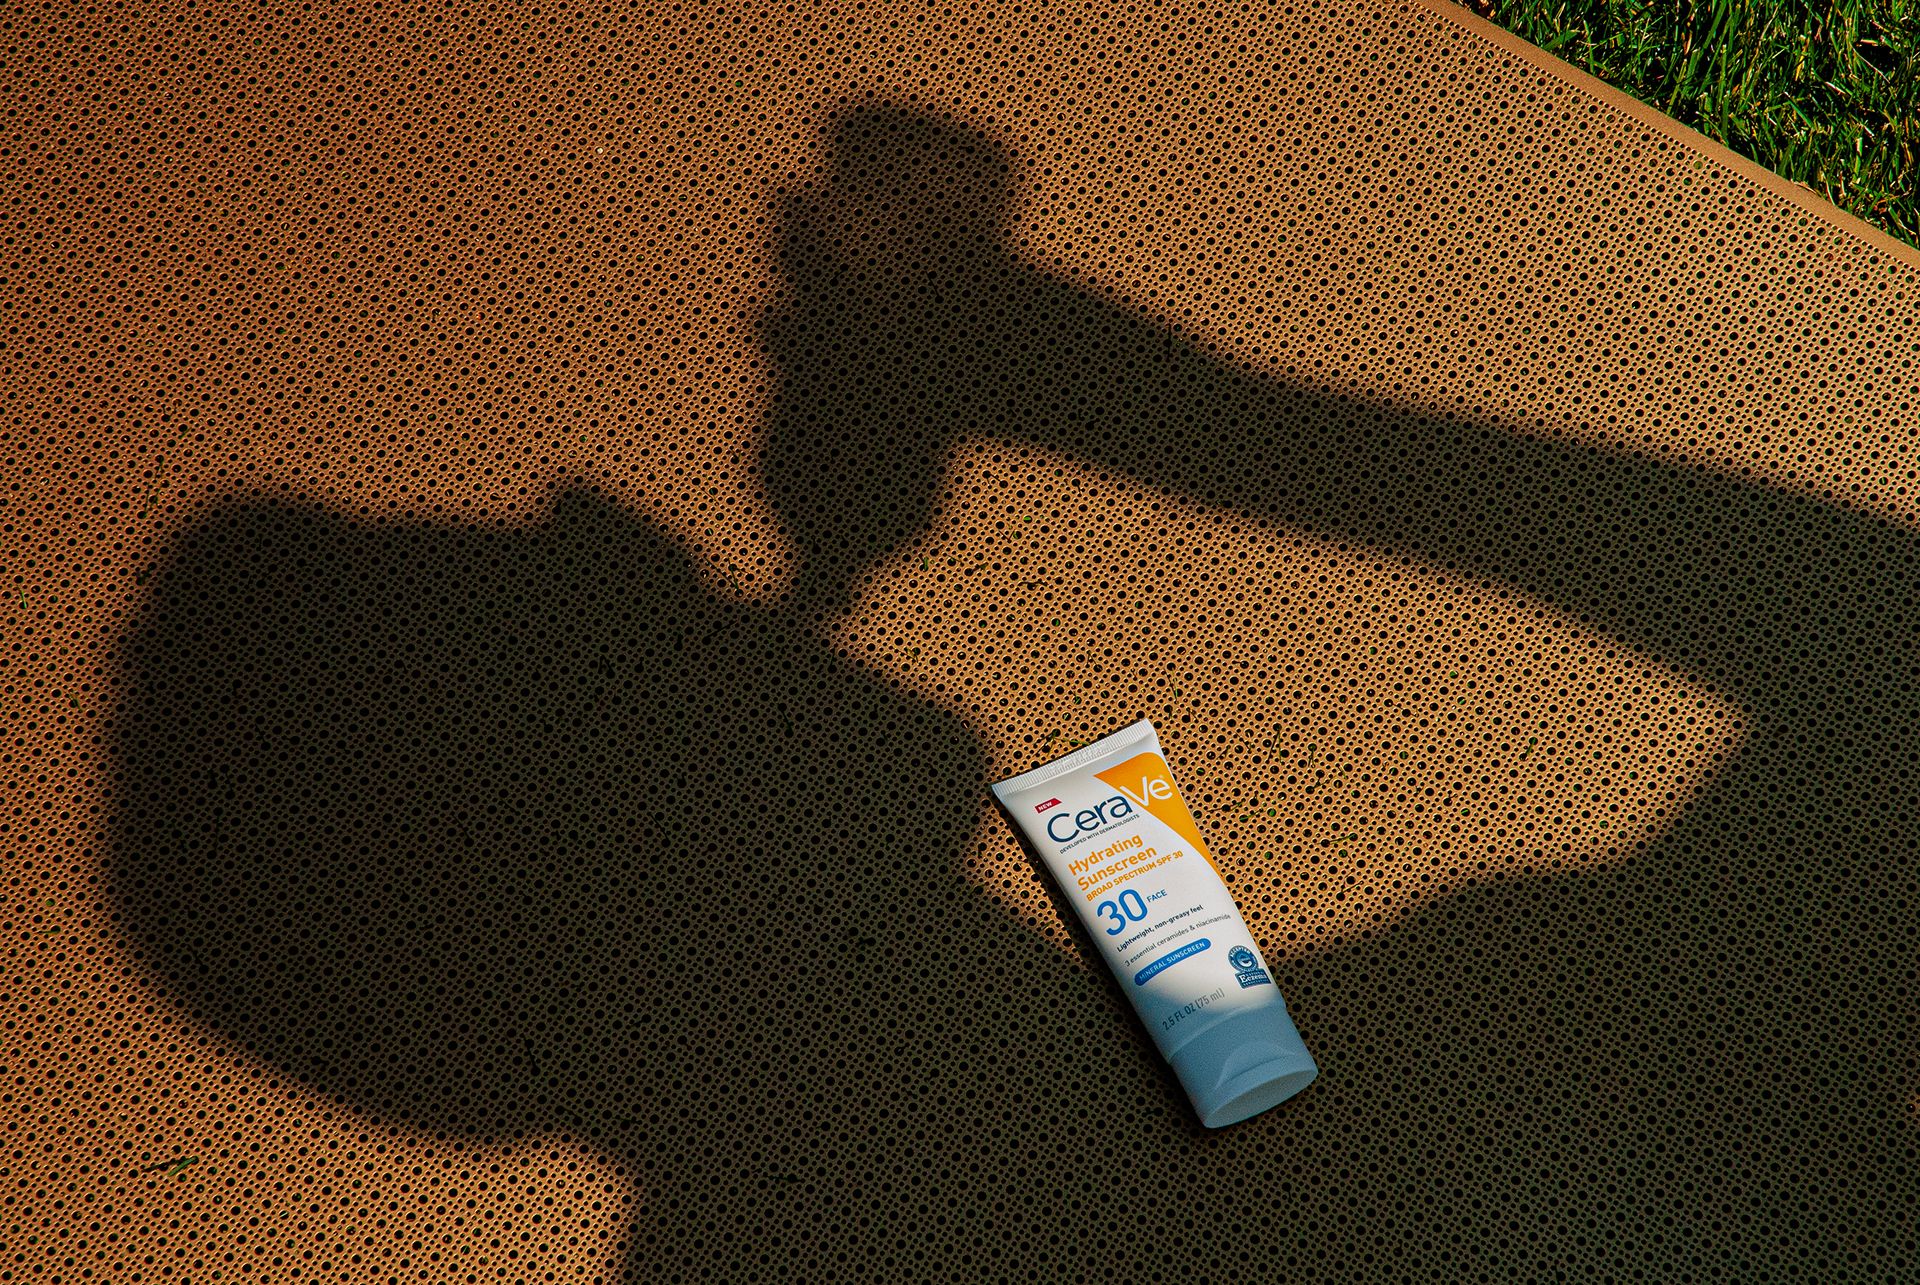 CeraVe Hydrating Sunscreen